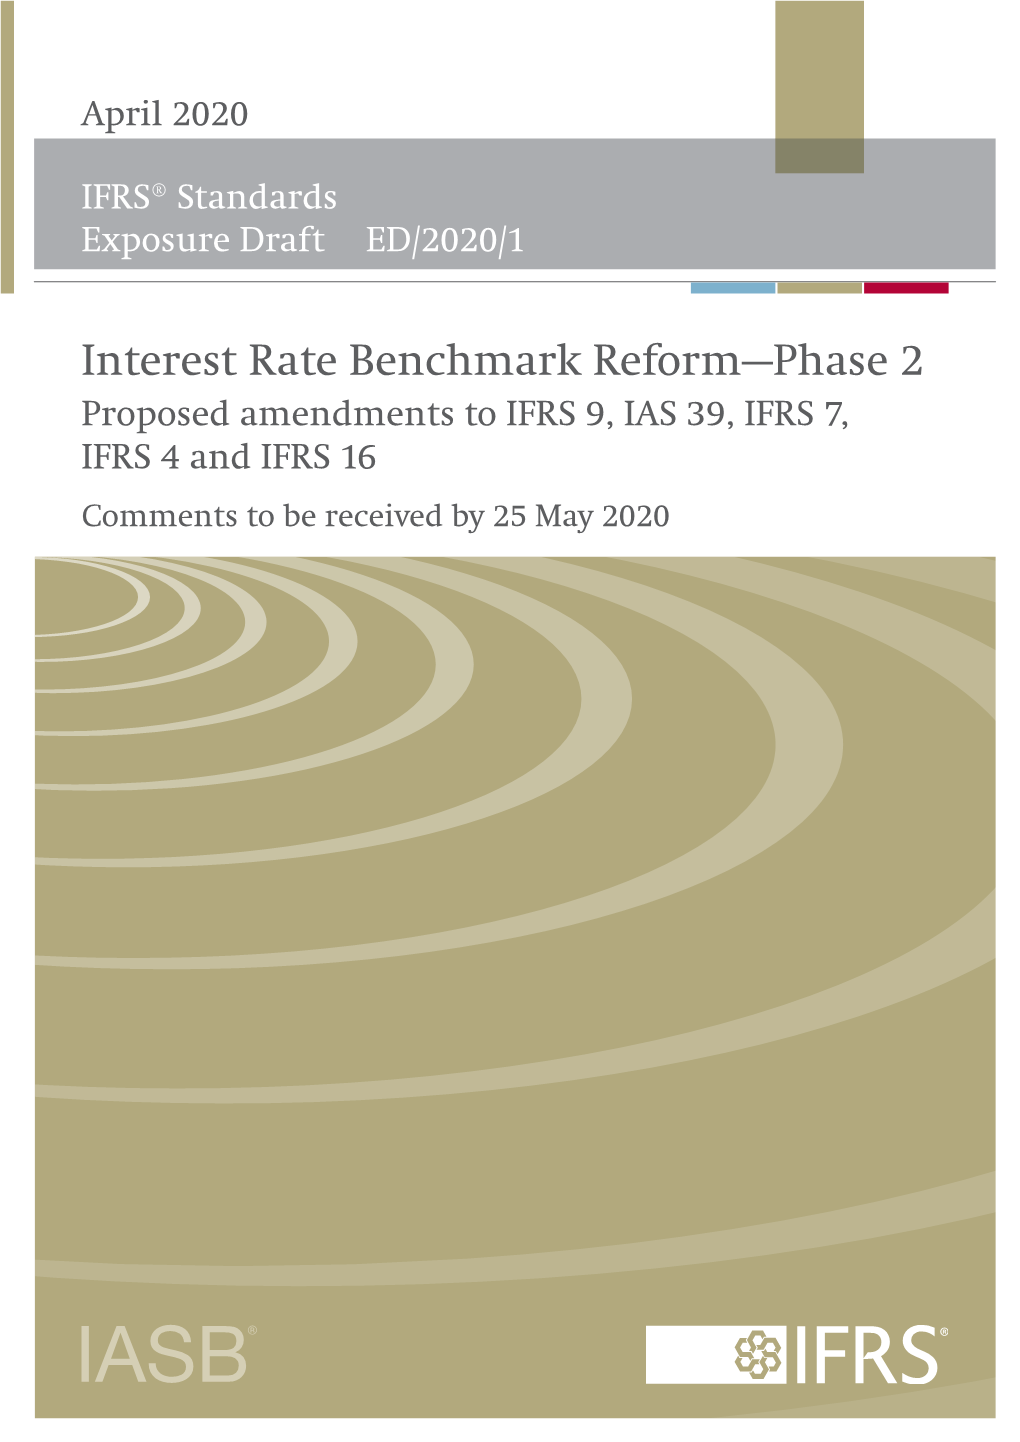 Exposure Draft: Interest Rate Benchmark Reform—Phase 2—Proposed Amendments to IFRS 9, IAS 39, IFRS 7, IFRS 4 and IFRS 16